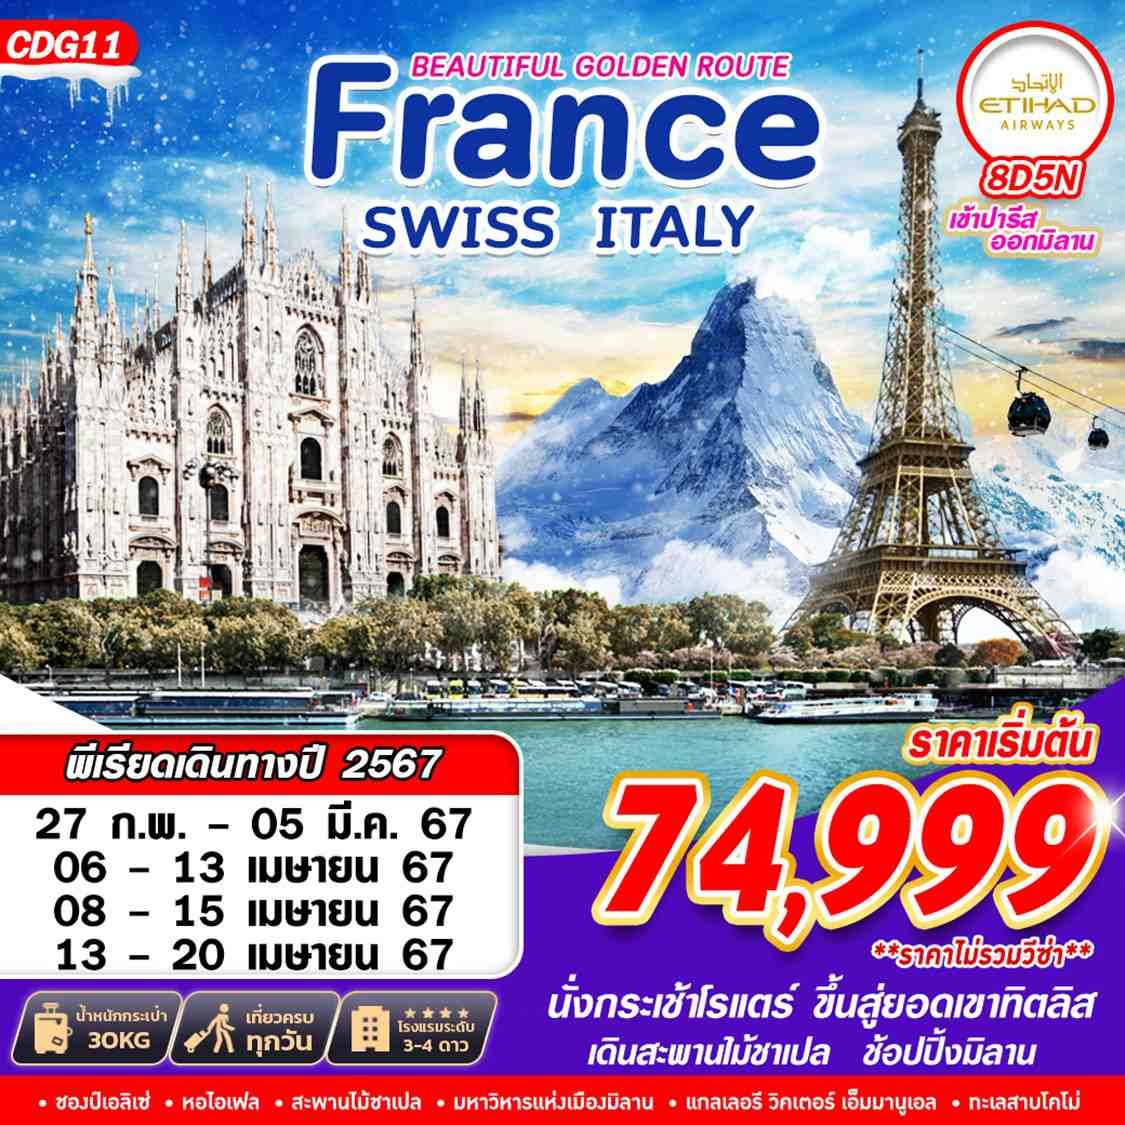 BEAUTIFUL GOLDEN ROUTE FRANCE SWISS ITALY 8 วัน 5 คืน